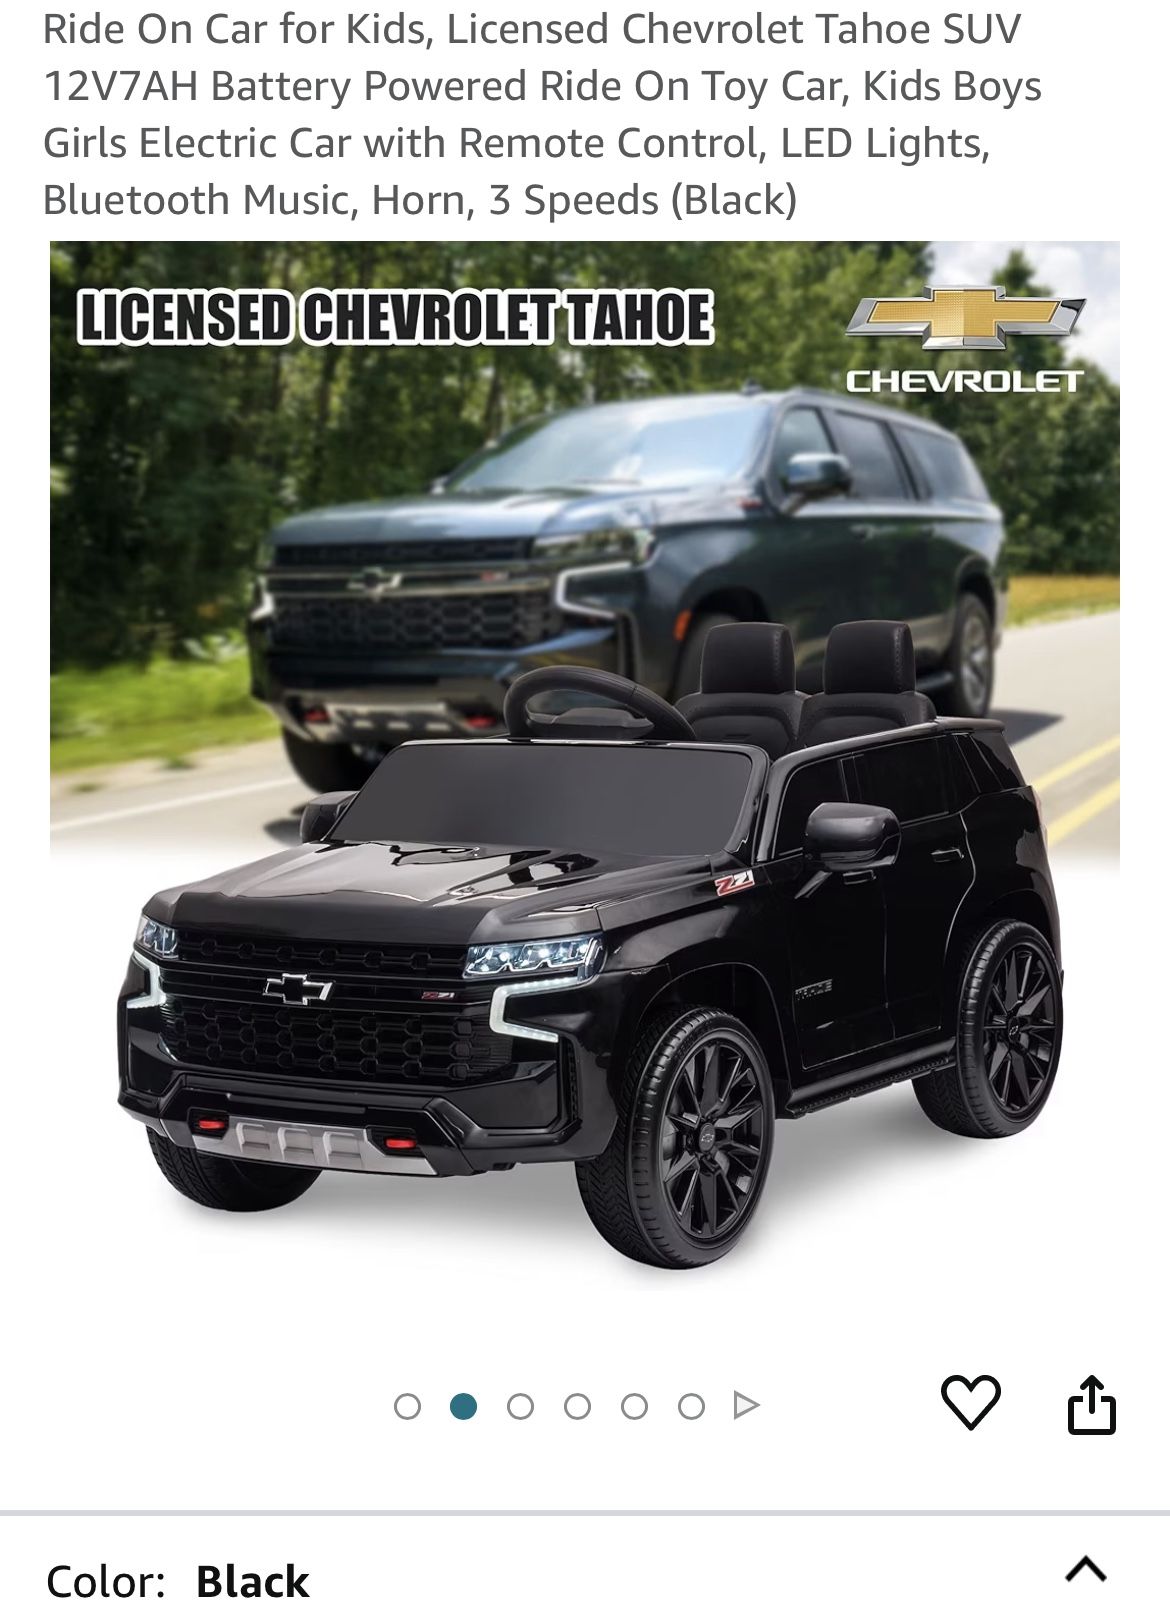 Ride On Car for Kids, Licensed Chevrolet Tahoe SUV 12V7AH Battery Powered Ride On Toy Car, Kids Boys Girls Electric Car with Remote Control, LED Light